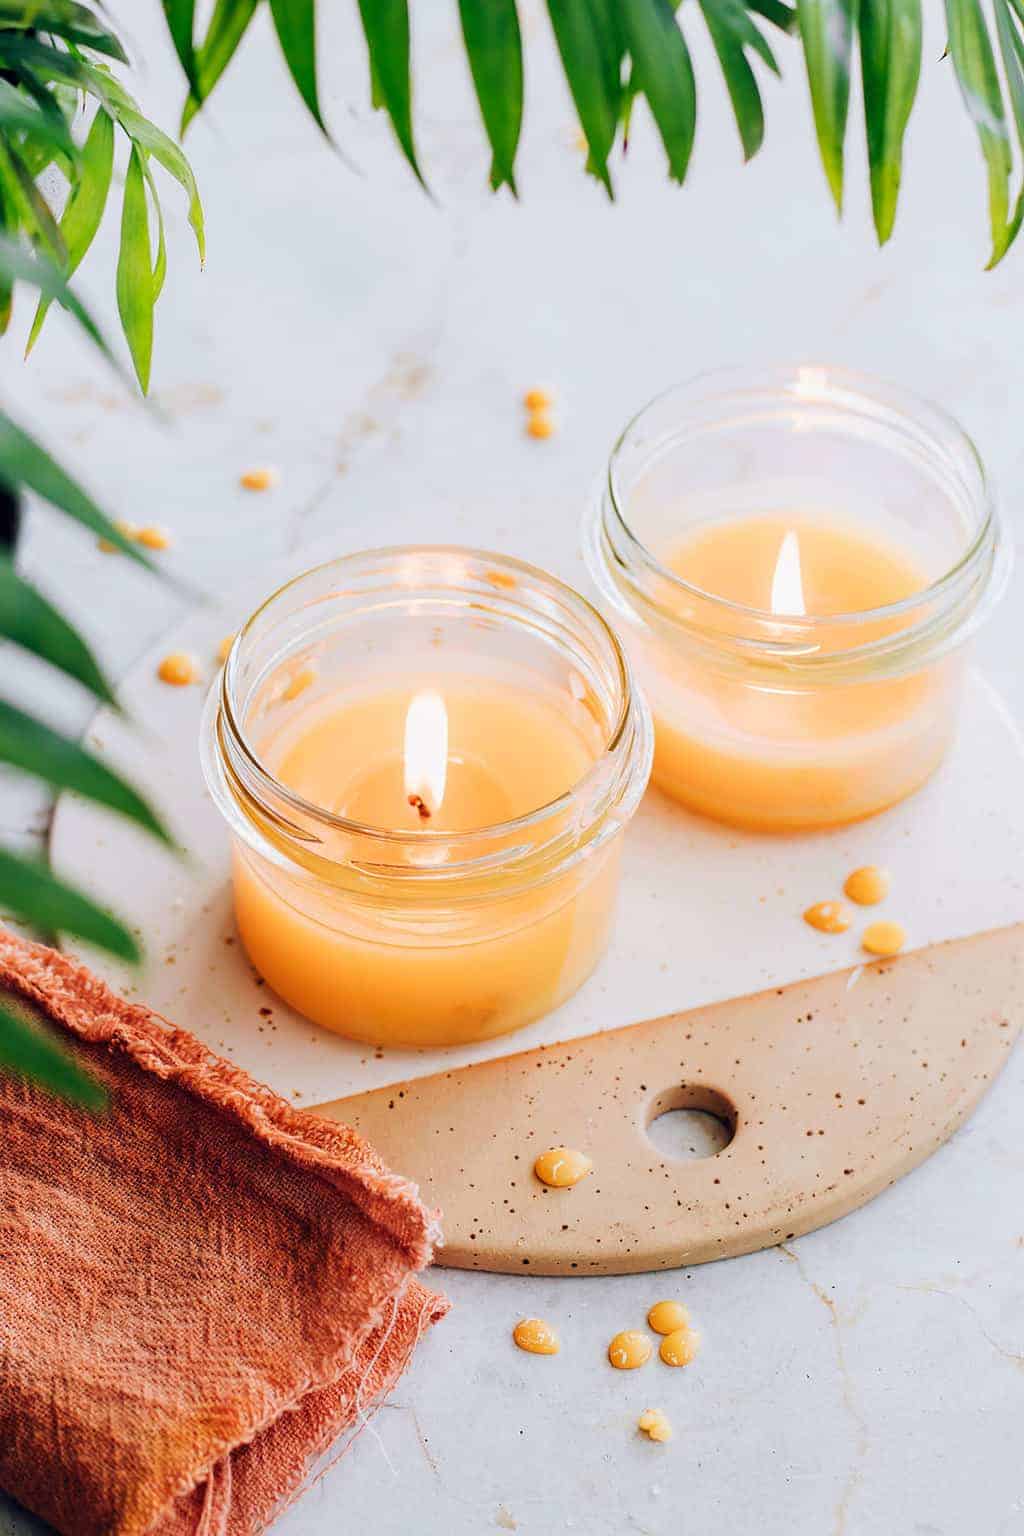 How to Make Beeswax Candles in the Oven